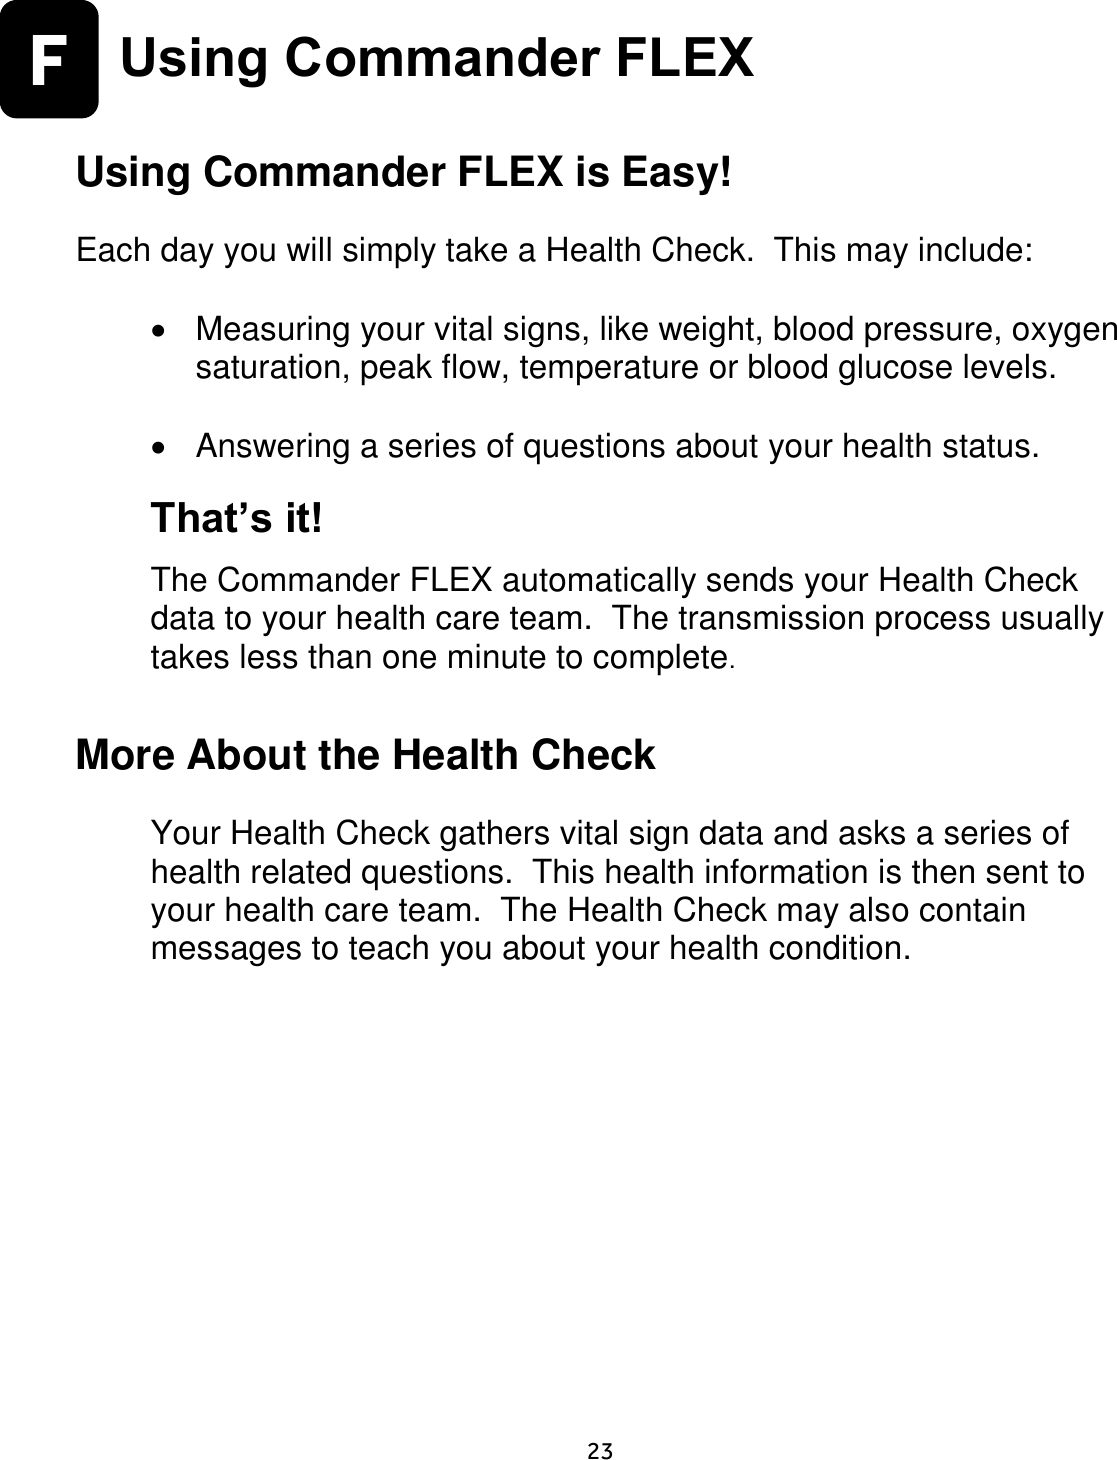     23  F  Using Commander FLEX  Using Commander FLEX is Easy!  Each day you will simply take a Health Check.  This may include:    Measuring your vital signs, like weight, blood pressure, oxygen saturation, peak flow, temperature or blood glucose levels.    Answering a series of questions about your health status.  That’s it!  The Commander FLEX automatically sends your Health Check data to your health care team.  The transmission process usually takes less than one minute to complete.  More About the Health Check  Your Health Check gathers vital sign data and asks a series of health related questions.  This health information is then sent to your health care team.  The Health Check may also contain messages to teach you about your health condition.   